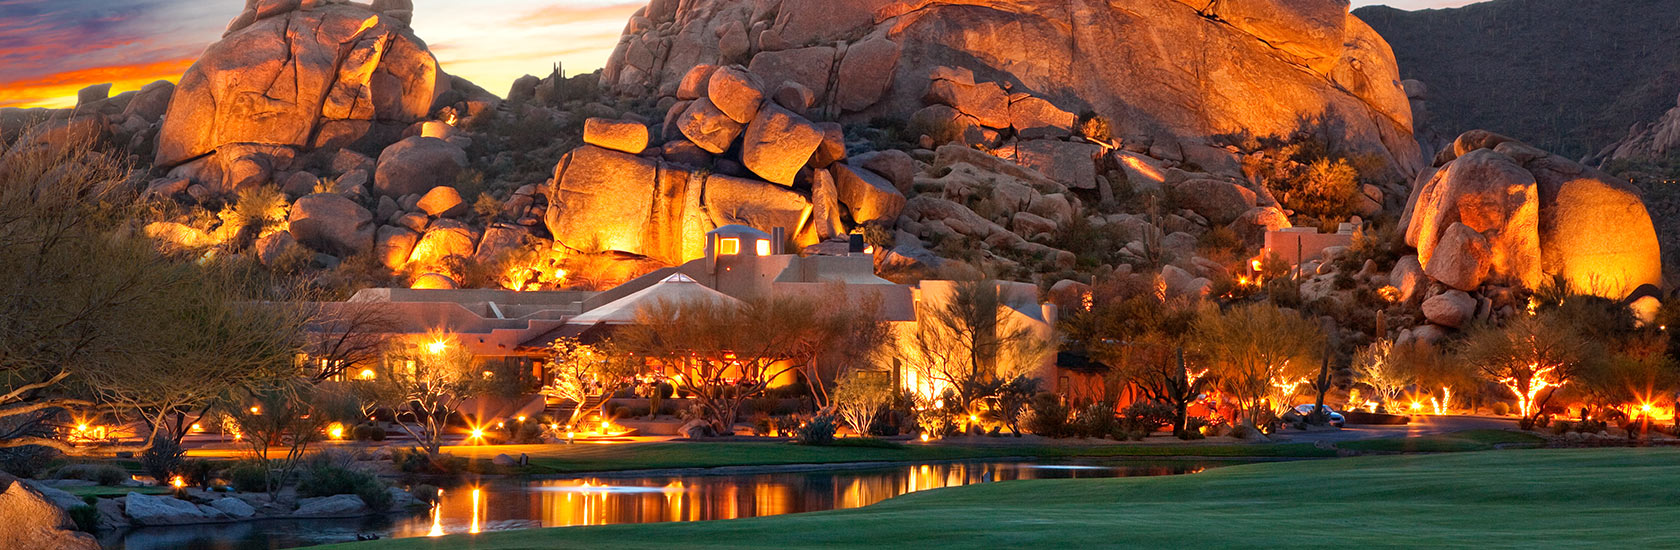 best-luxury-hotels-in-the-world-the-boulders